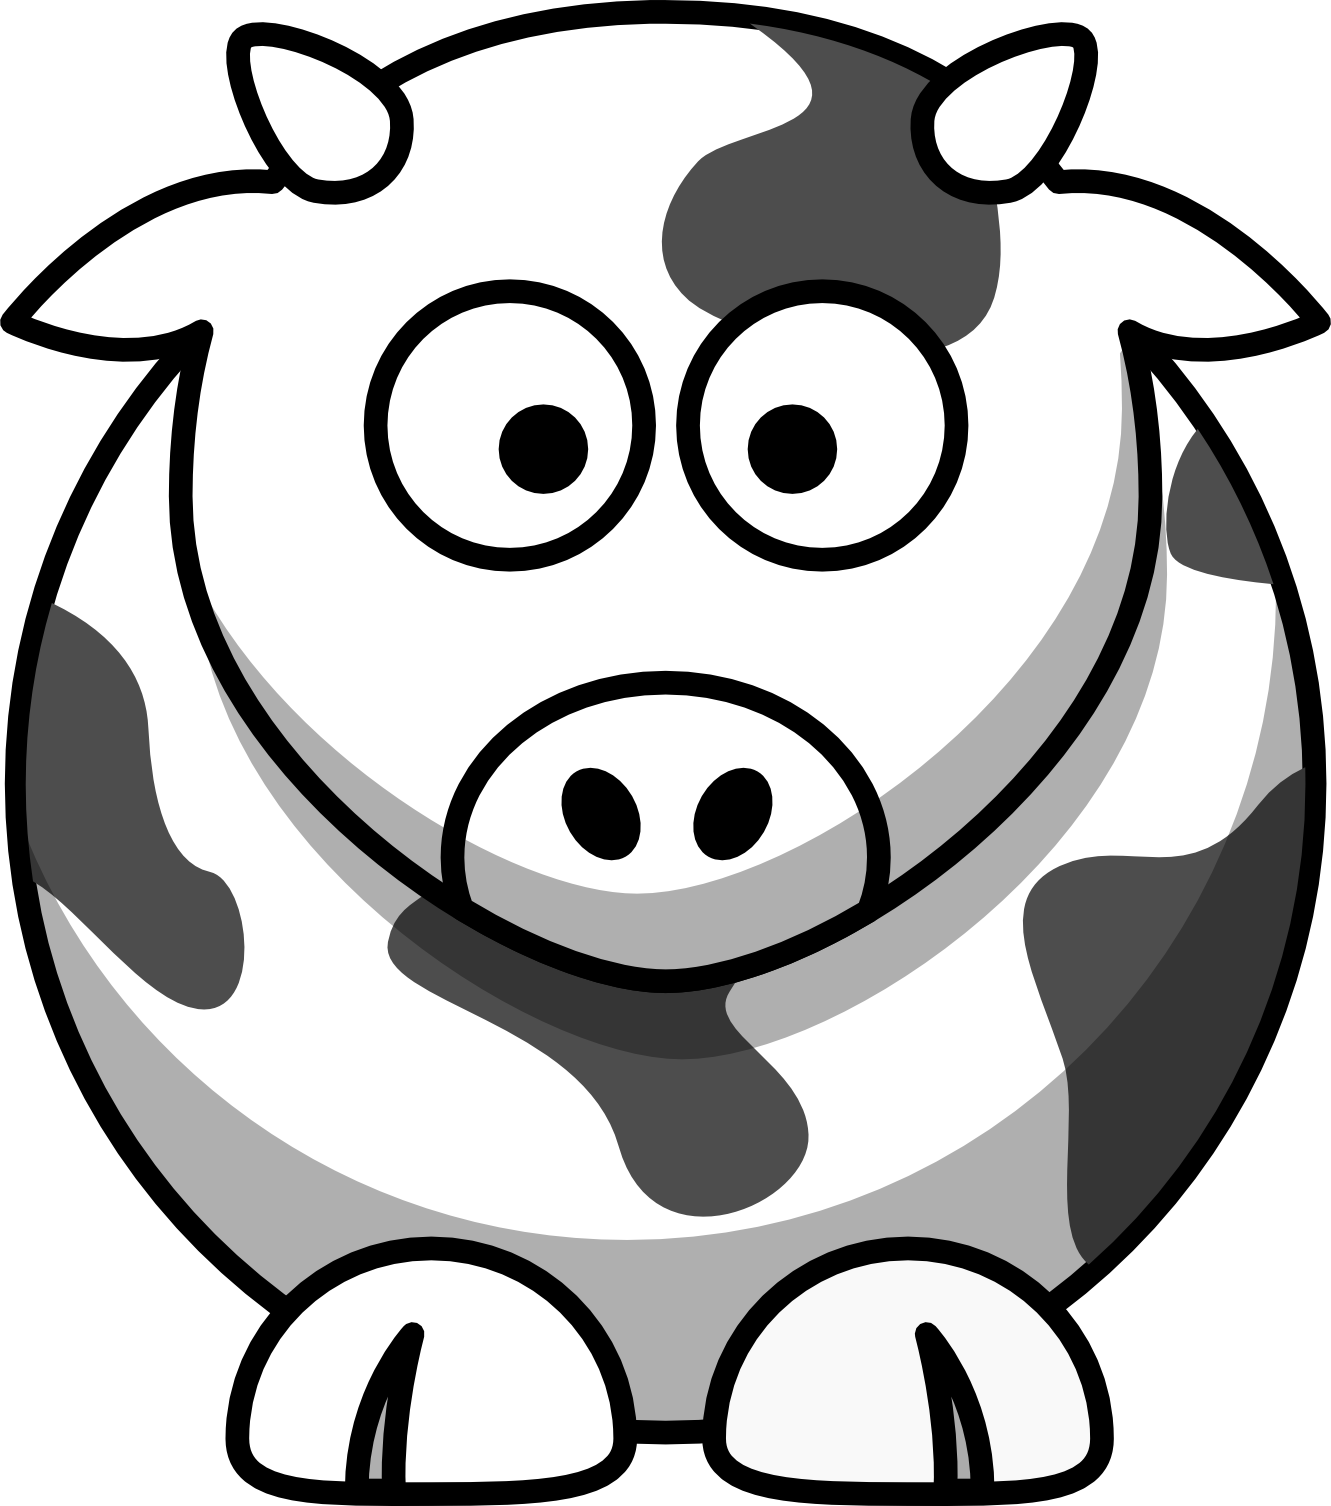 Lemmling Cartoon Cow Coloring Book Colouring Black White Line Art ...